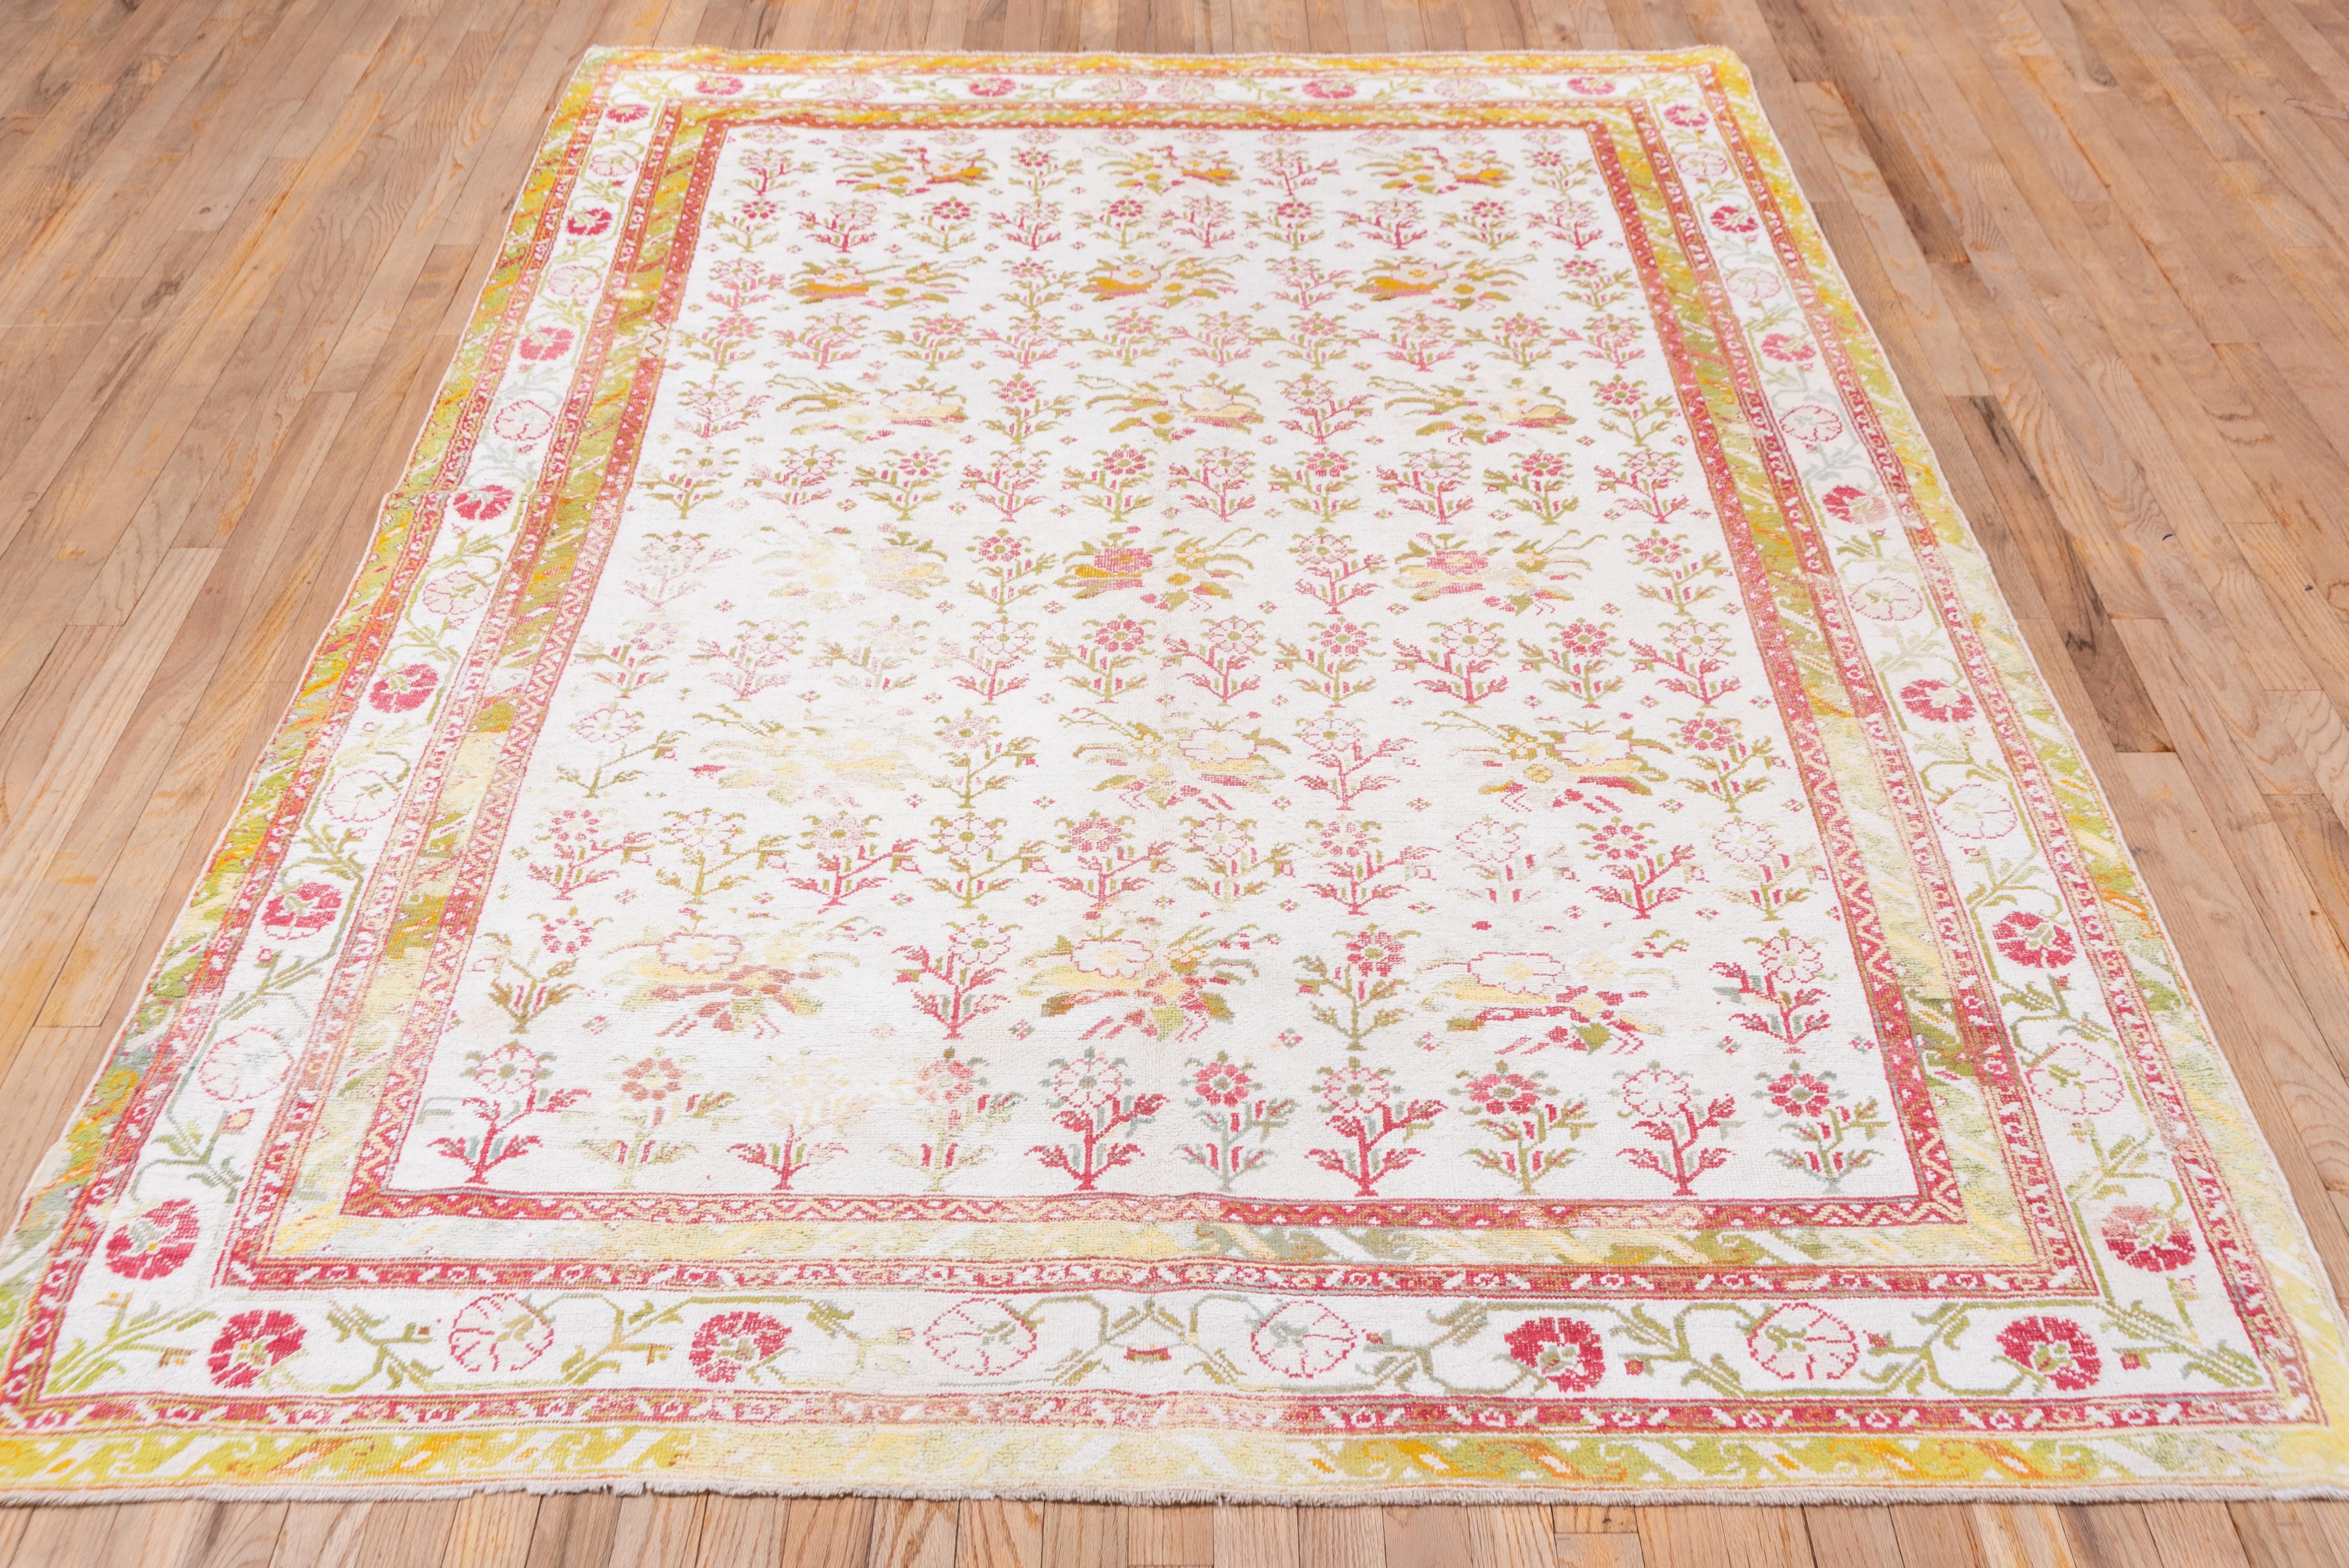 The age is indicated by the selective color corrosion in the dark brown, but otherwise the condition is fairly good. Cotton pile rugs were almost all produced in Agra in northern India and have light palettes. The cream field shows stemmed flower